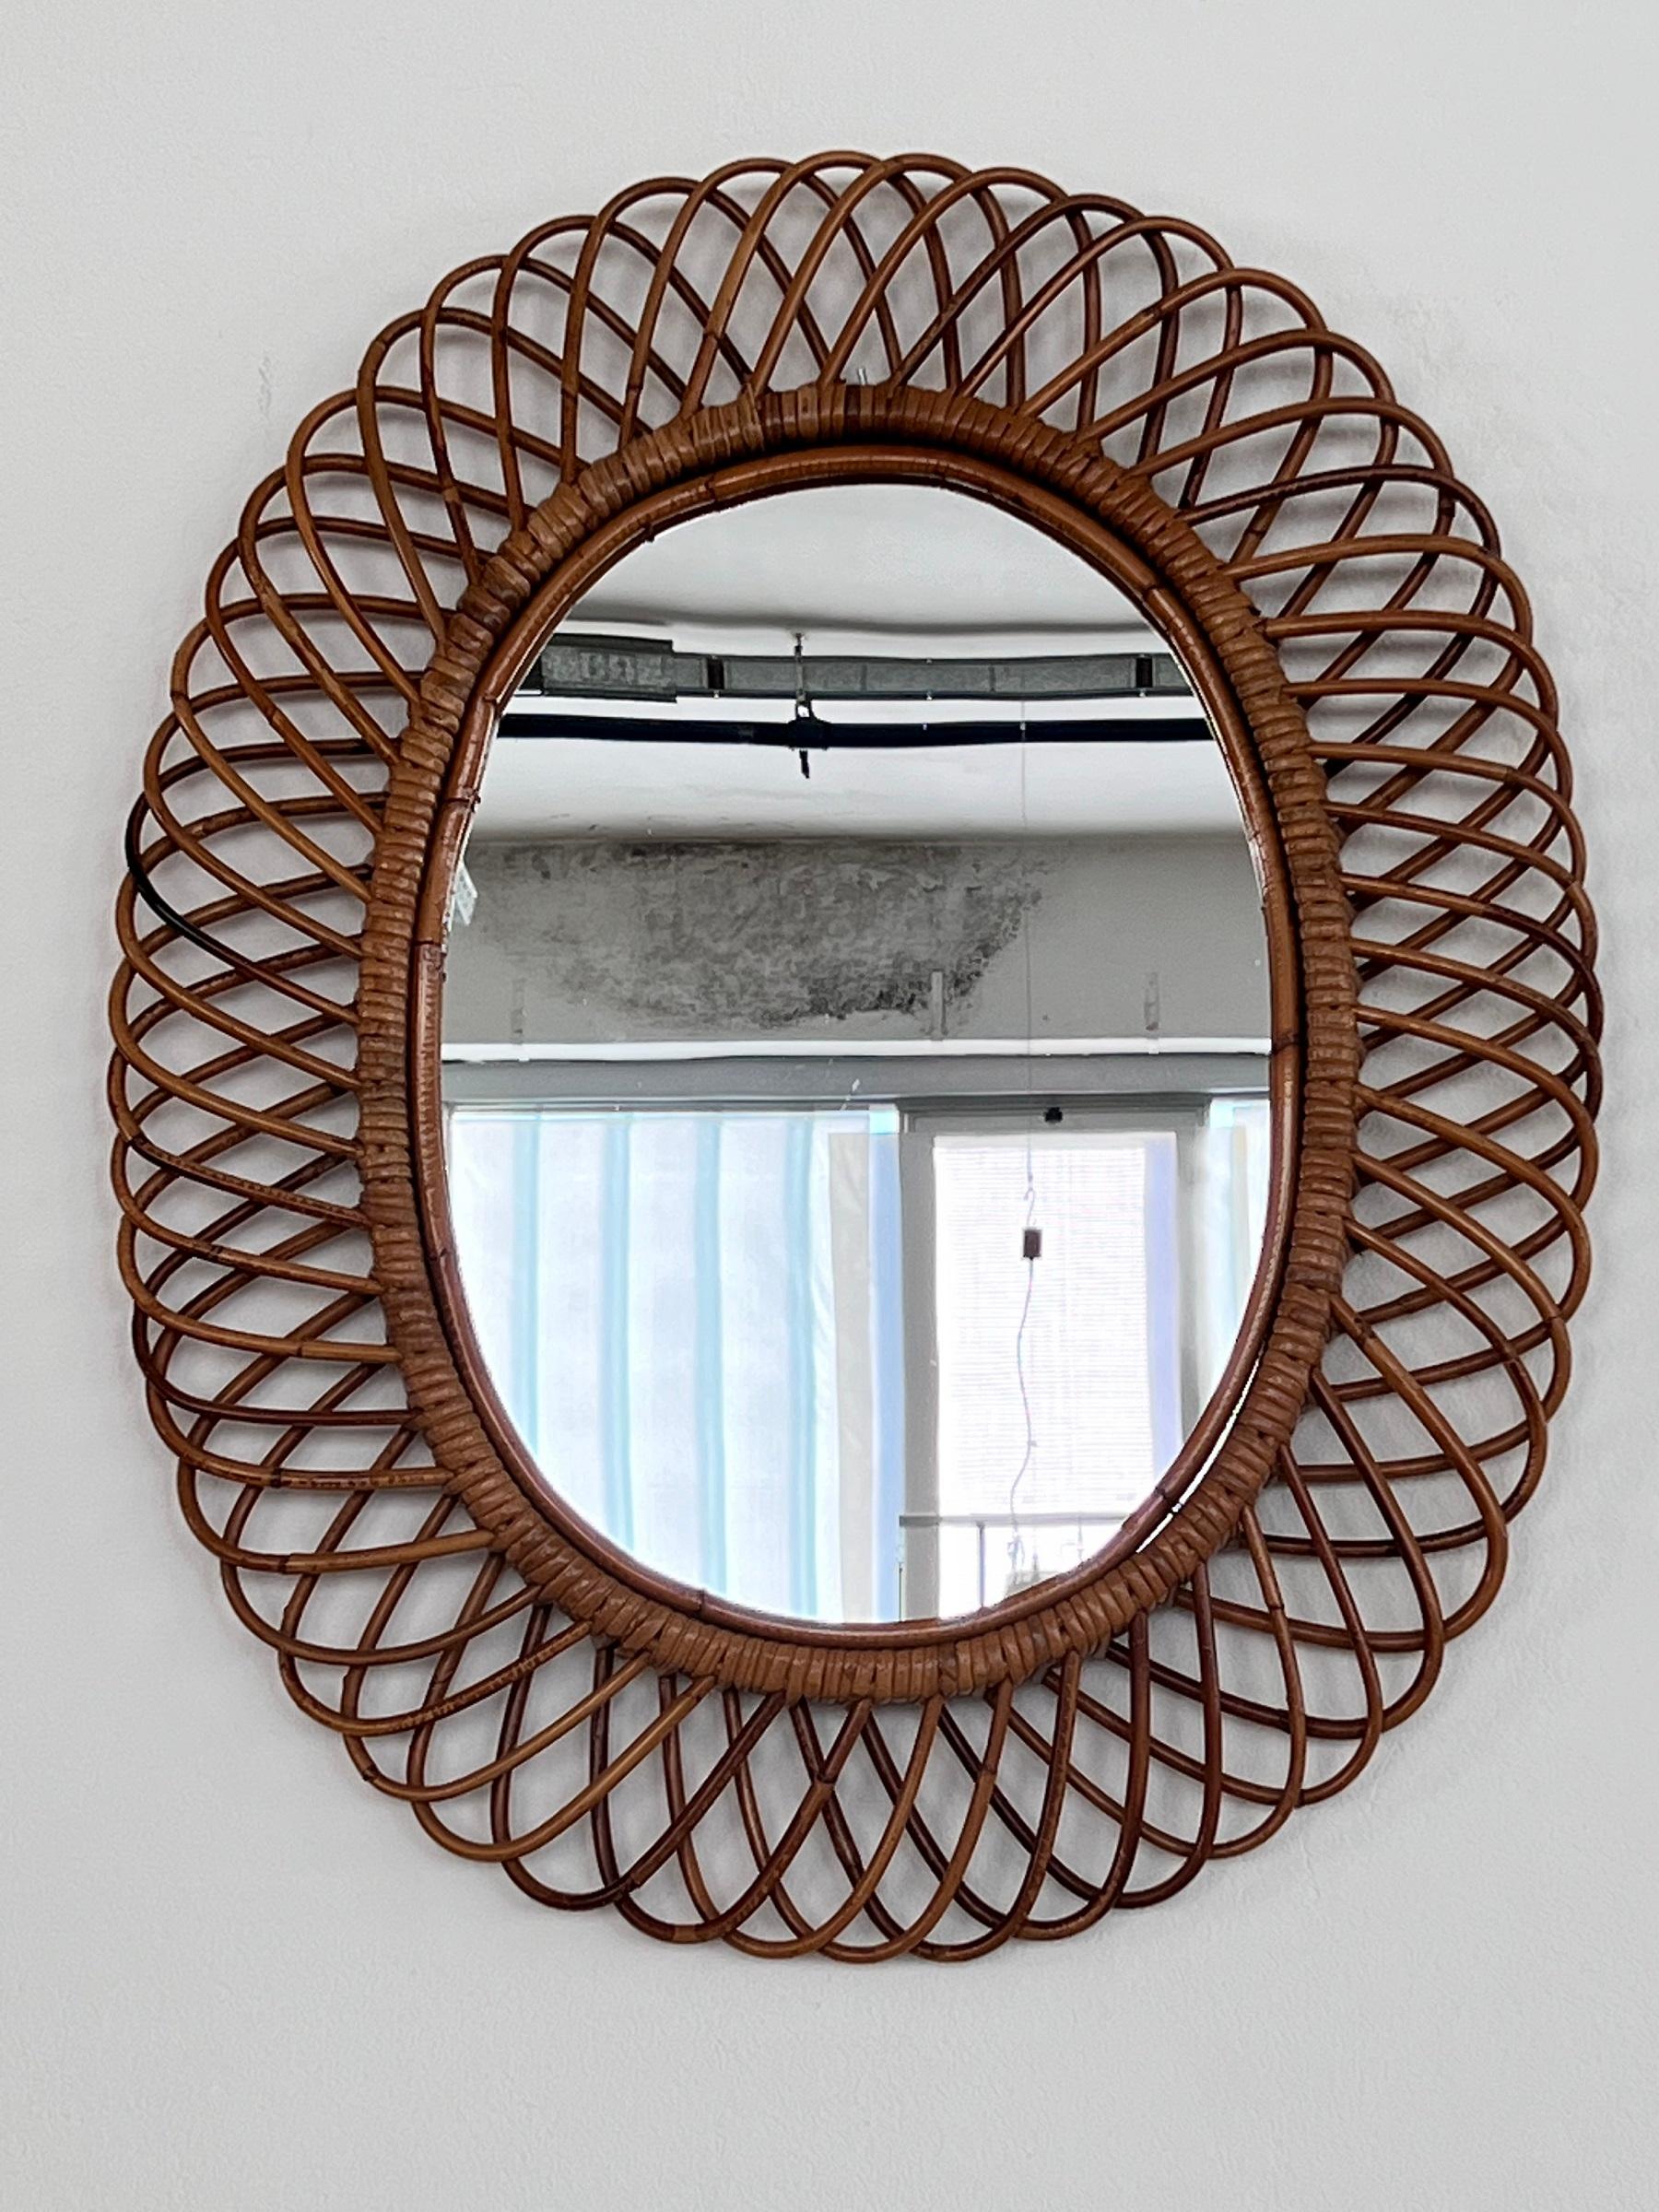 Mid-20th Century Italian Midcentury Oval Wall Mirror With Bamboo Frame Franco Albini Style, 1960s For Sale